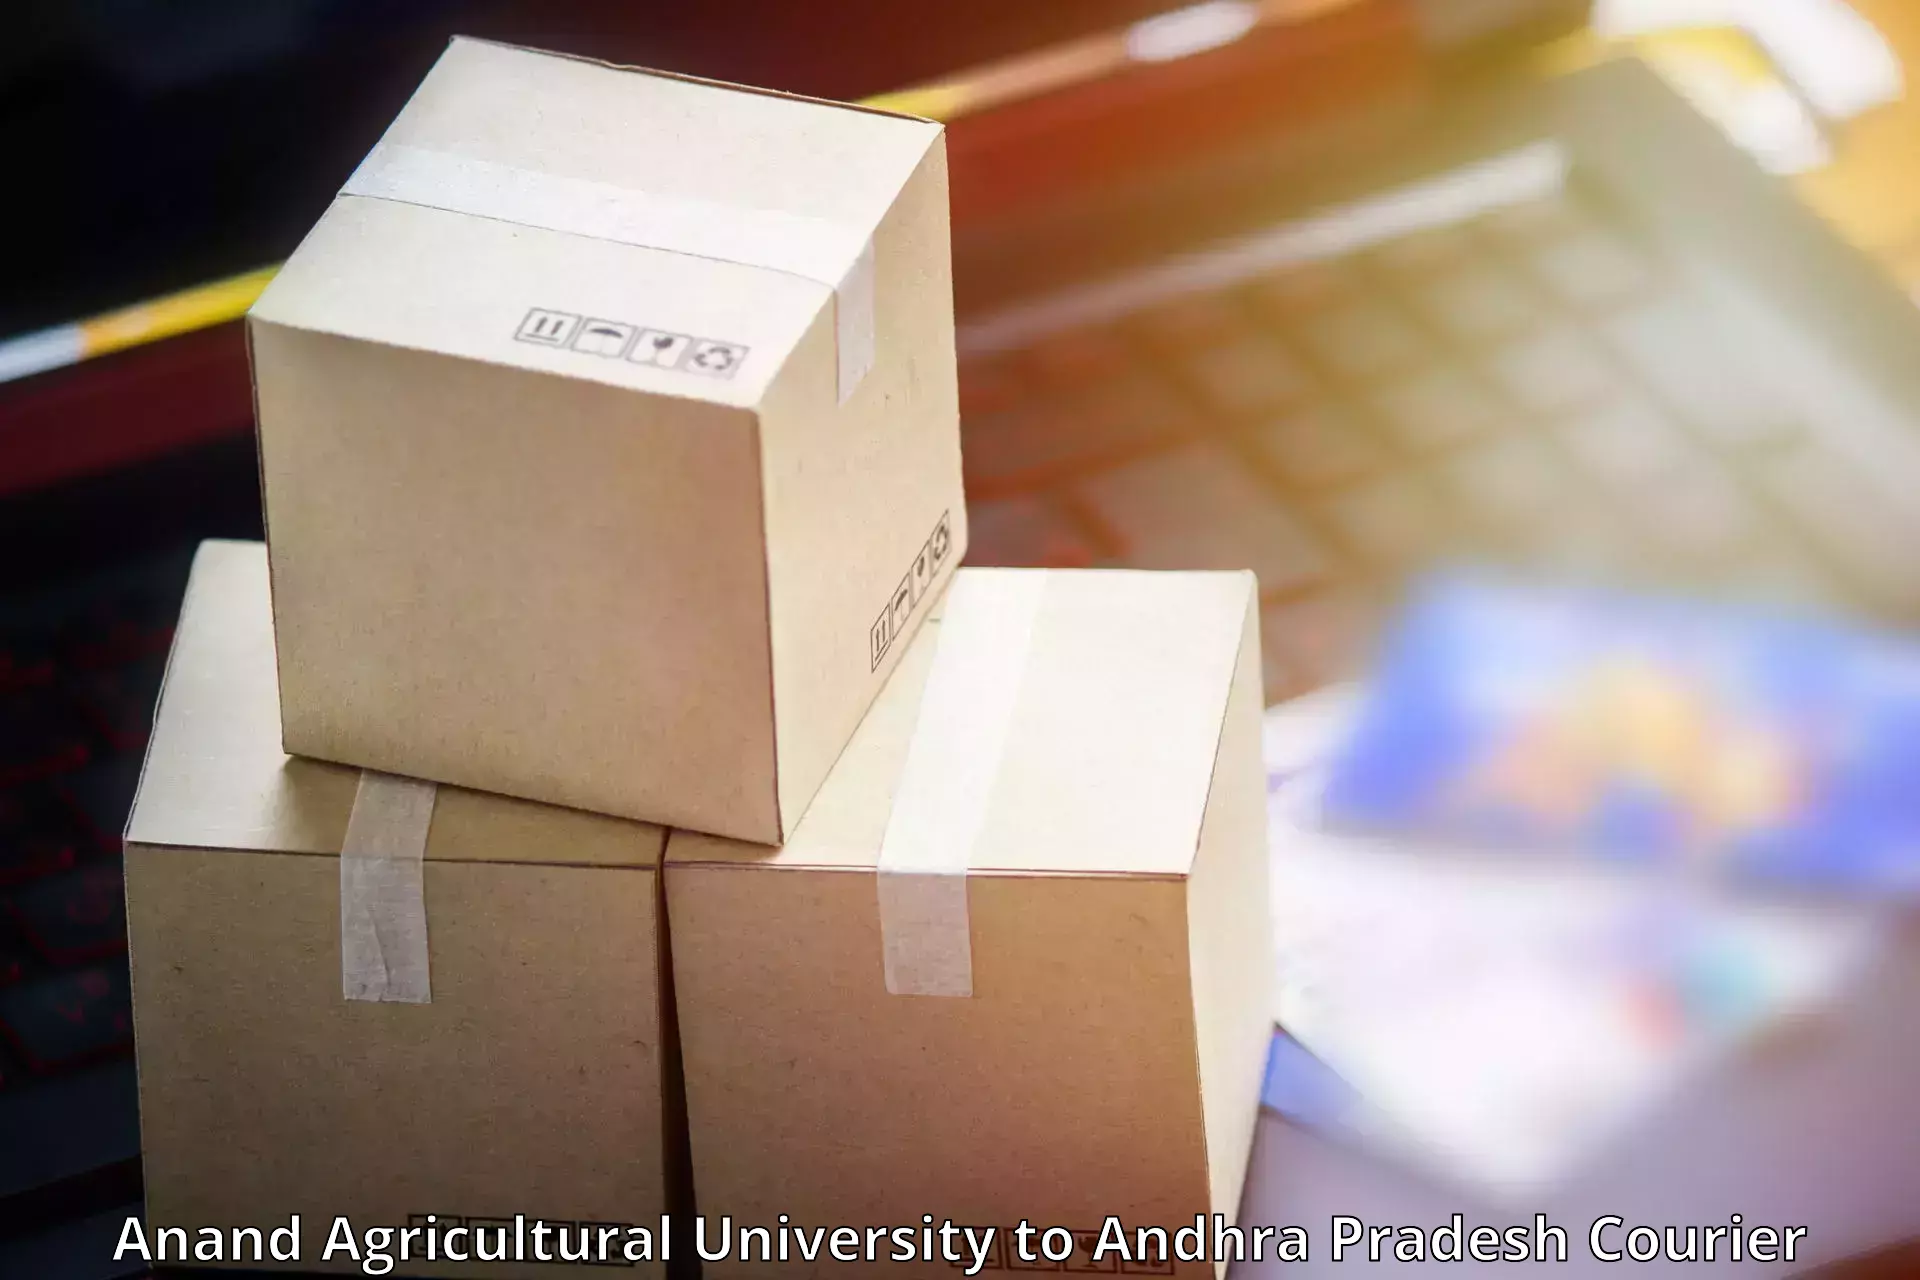 Special handling courier Anand Agricultural University to Chimakurthy